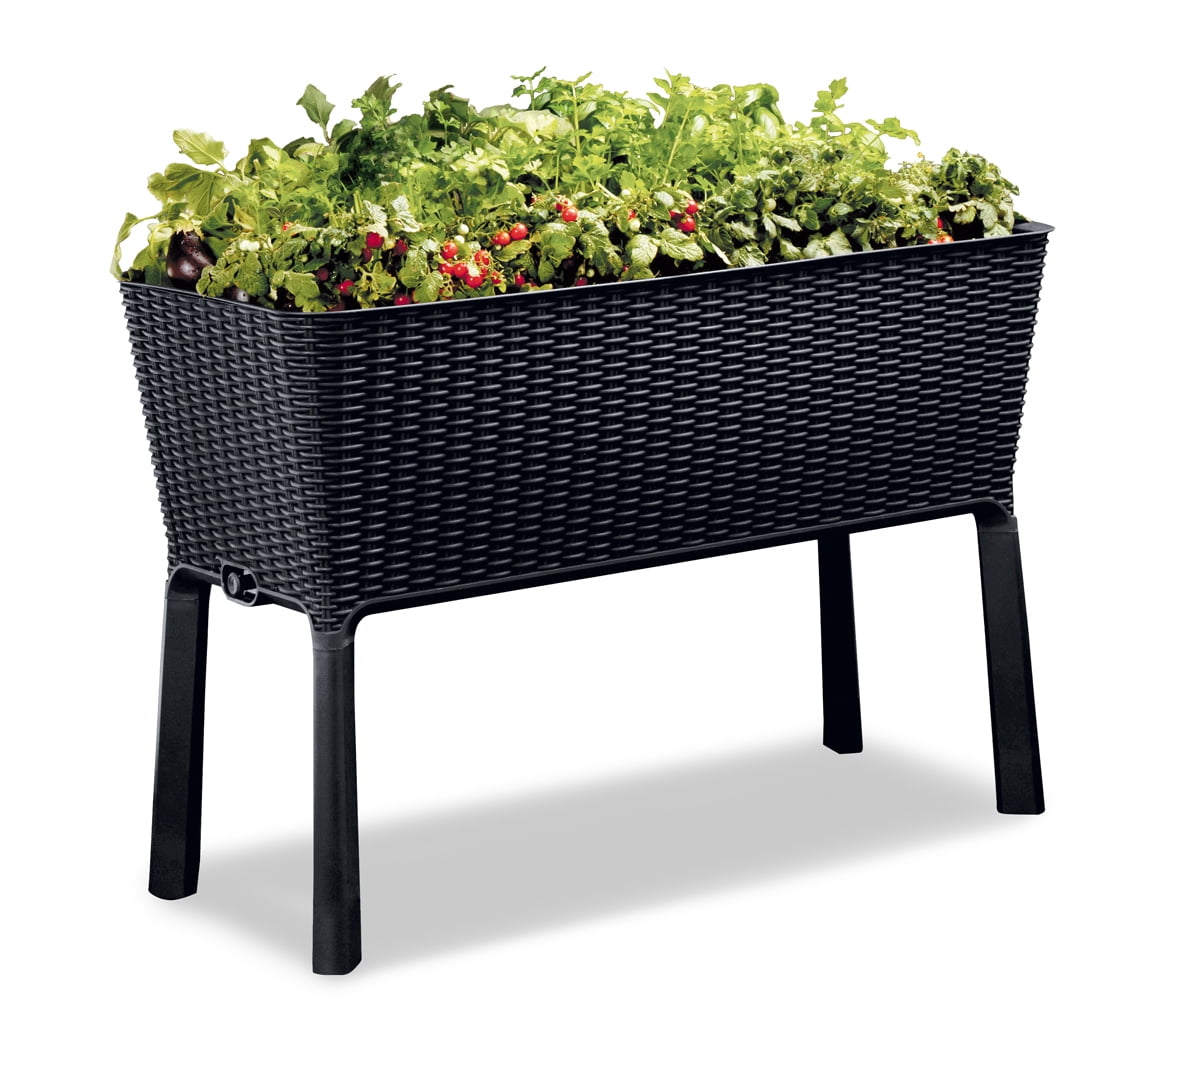 Image of Keter Classic Raised Garden Bed